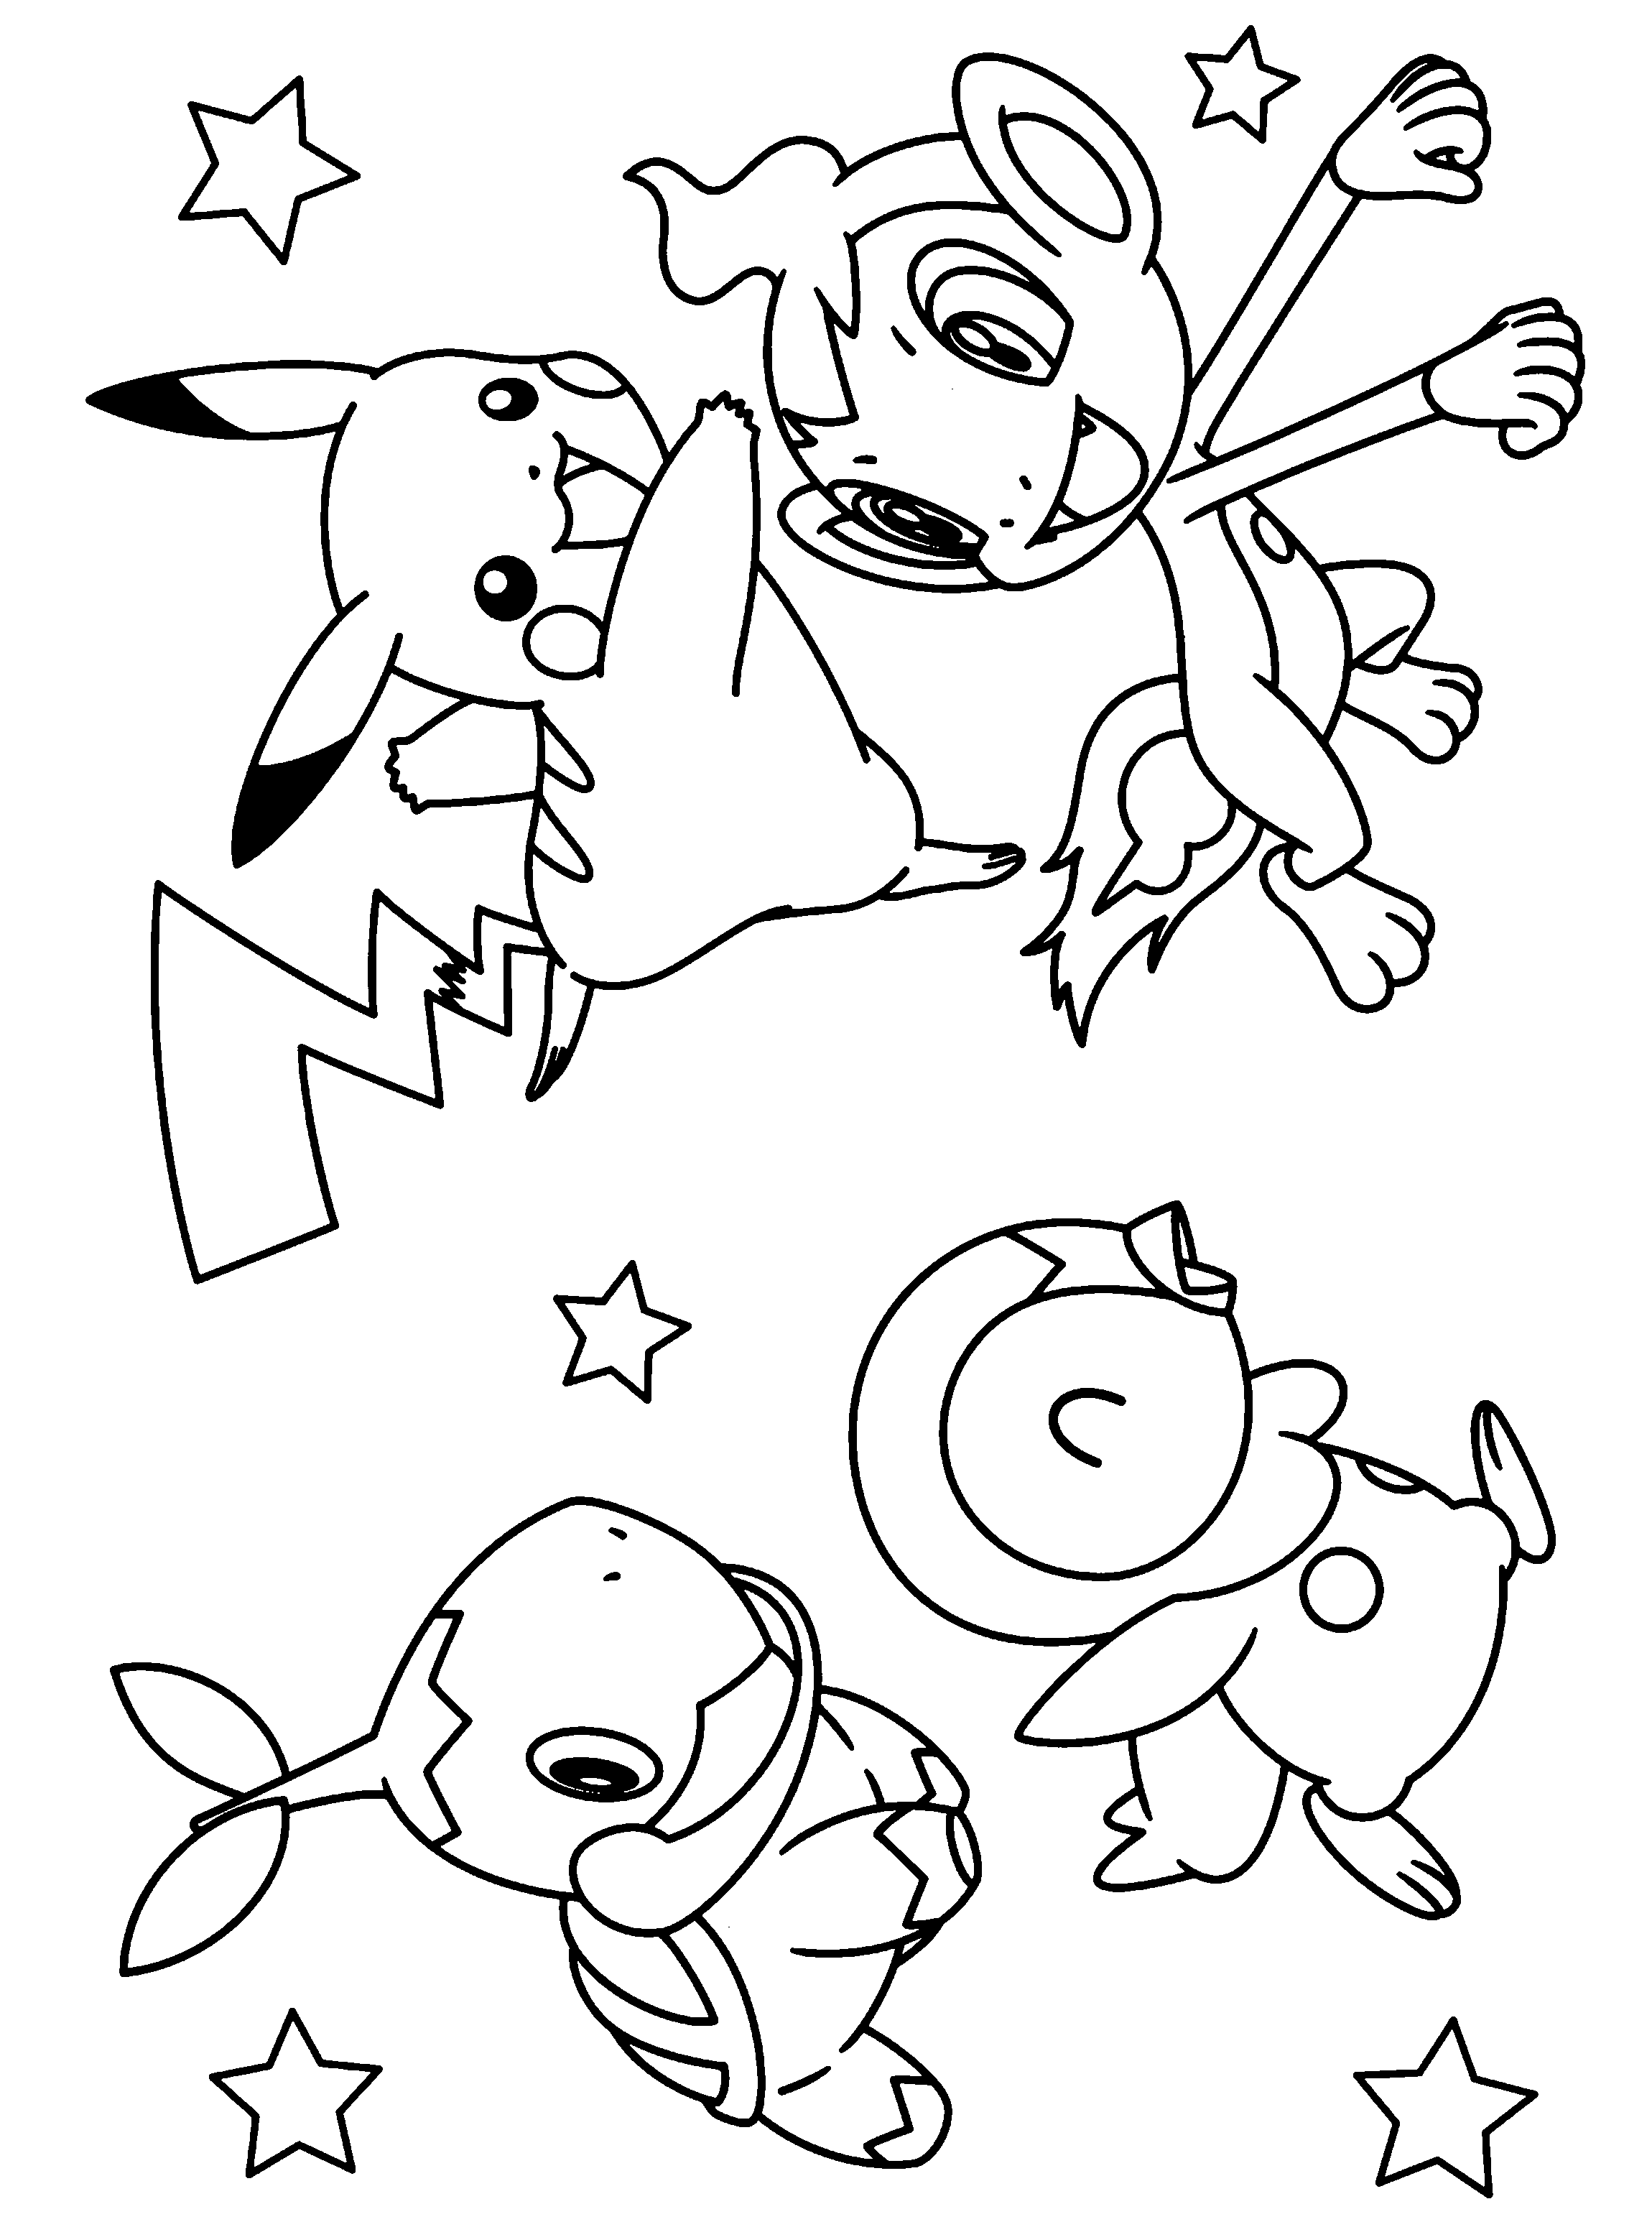 Free Pokemon Coloring Pages For Adults, Download Free Pokemon